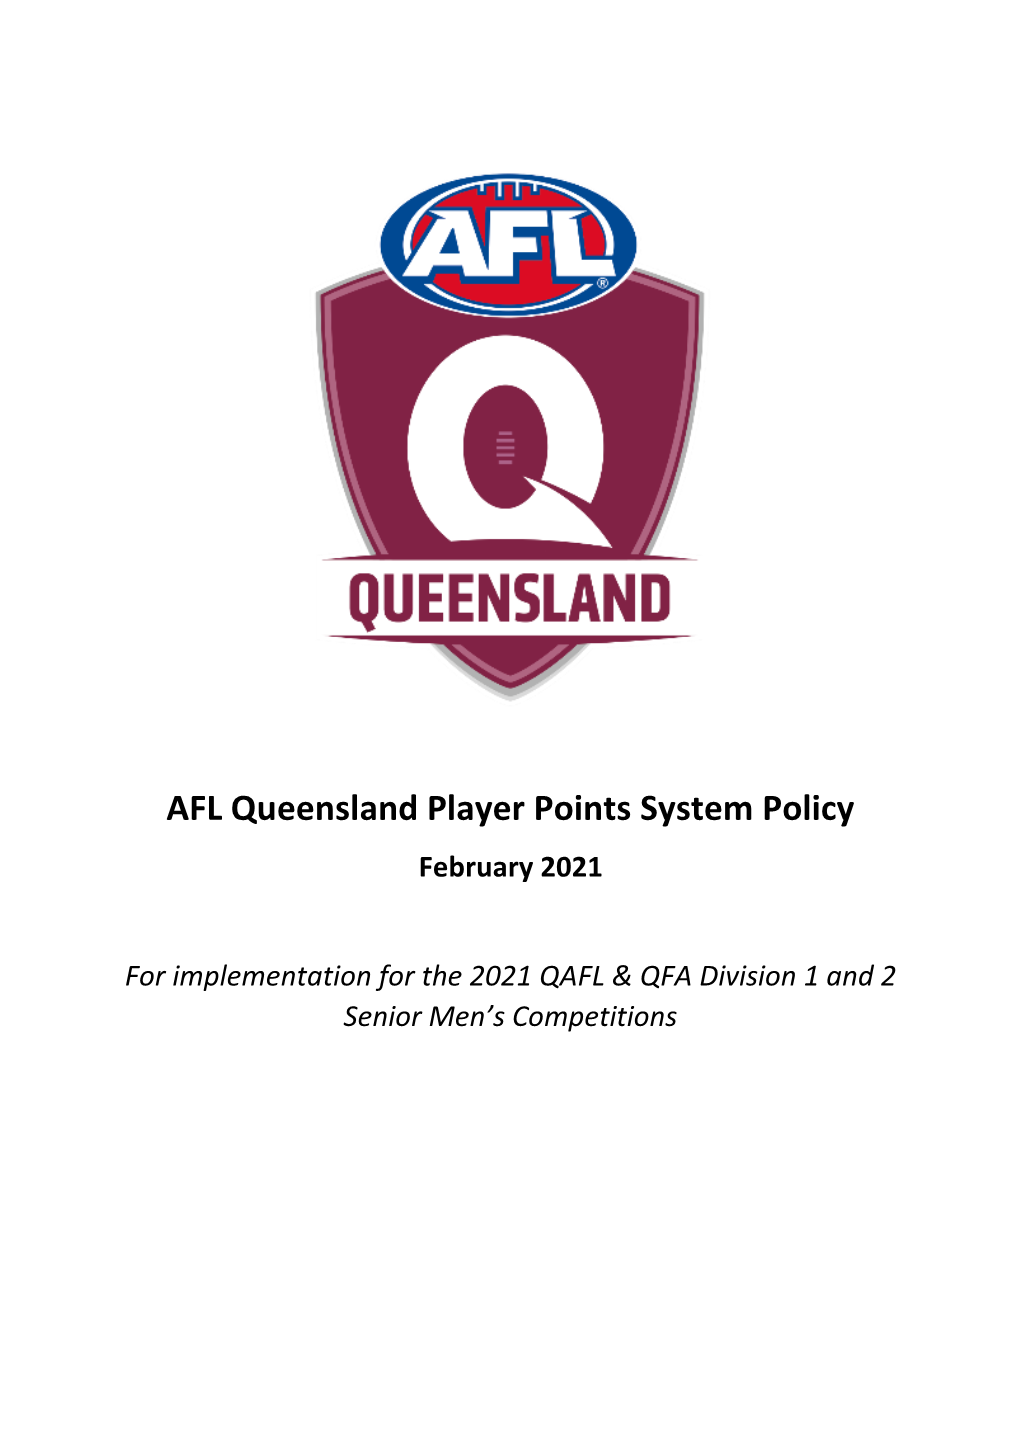 AFL Queensland Player Points System Policy February 2021